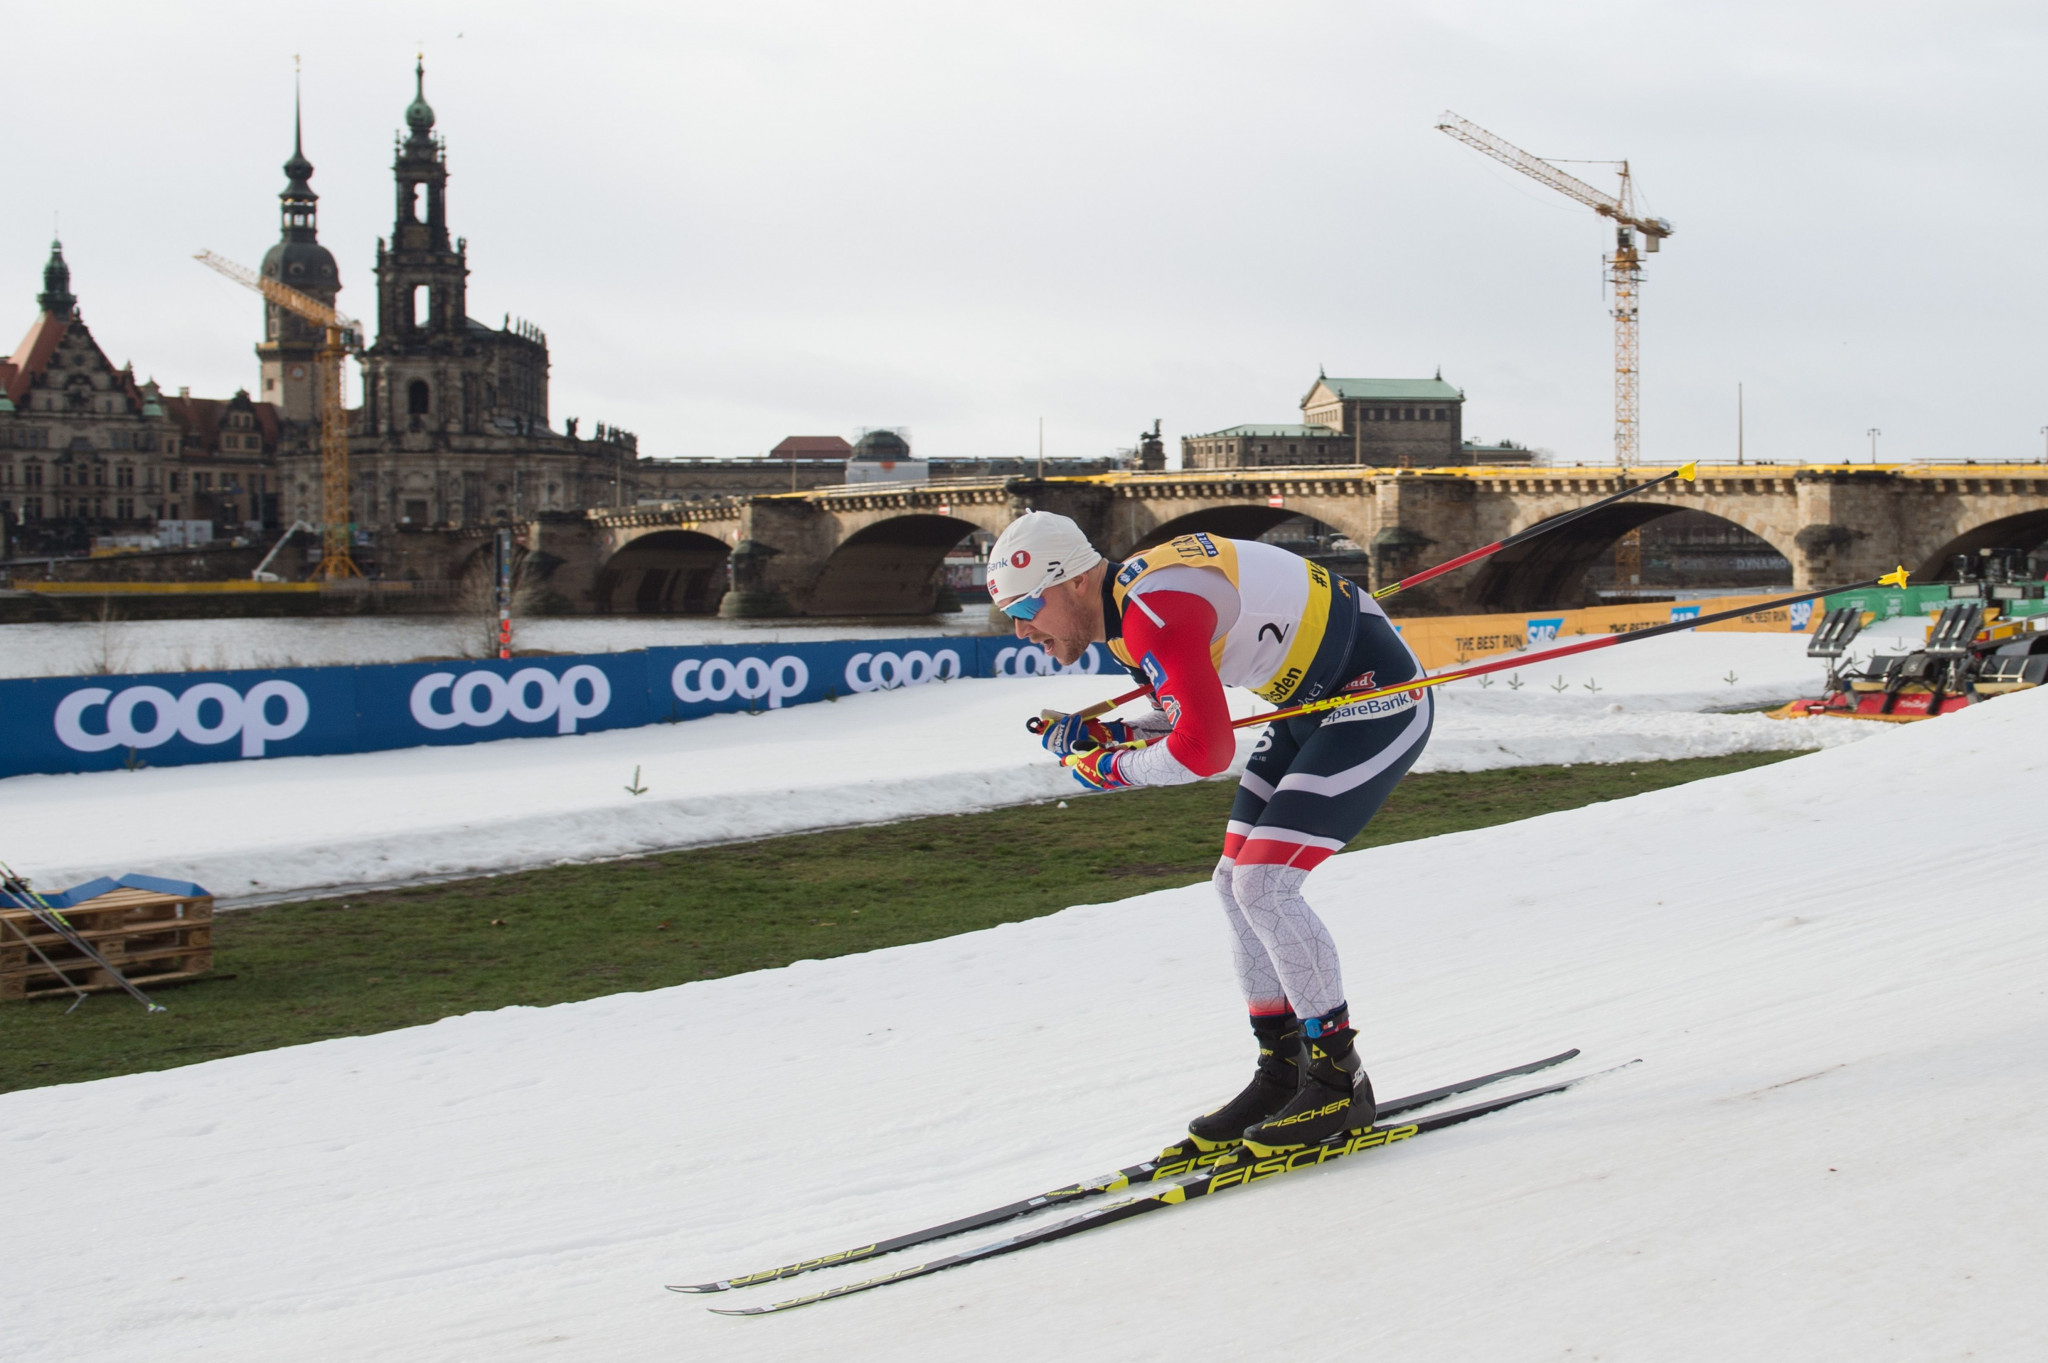 Altenberg and Dresden to host joint FIS and World Para World Cup